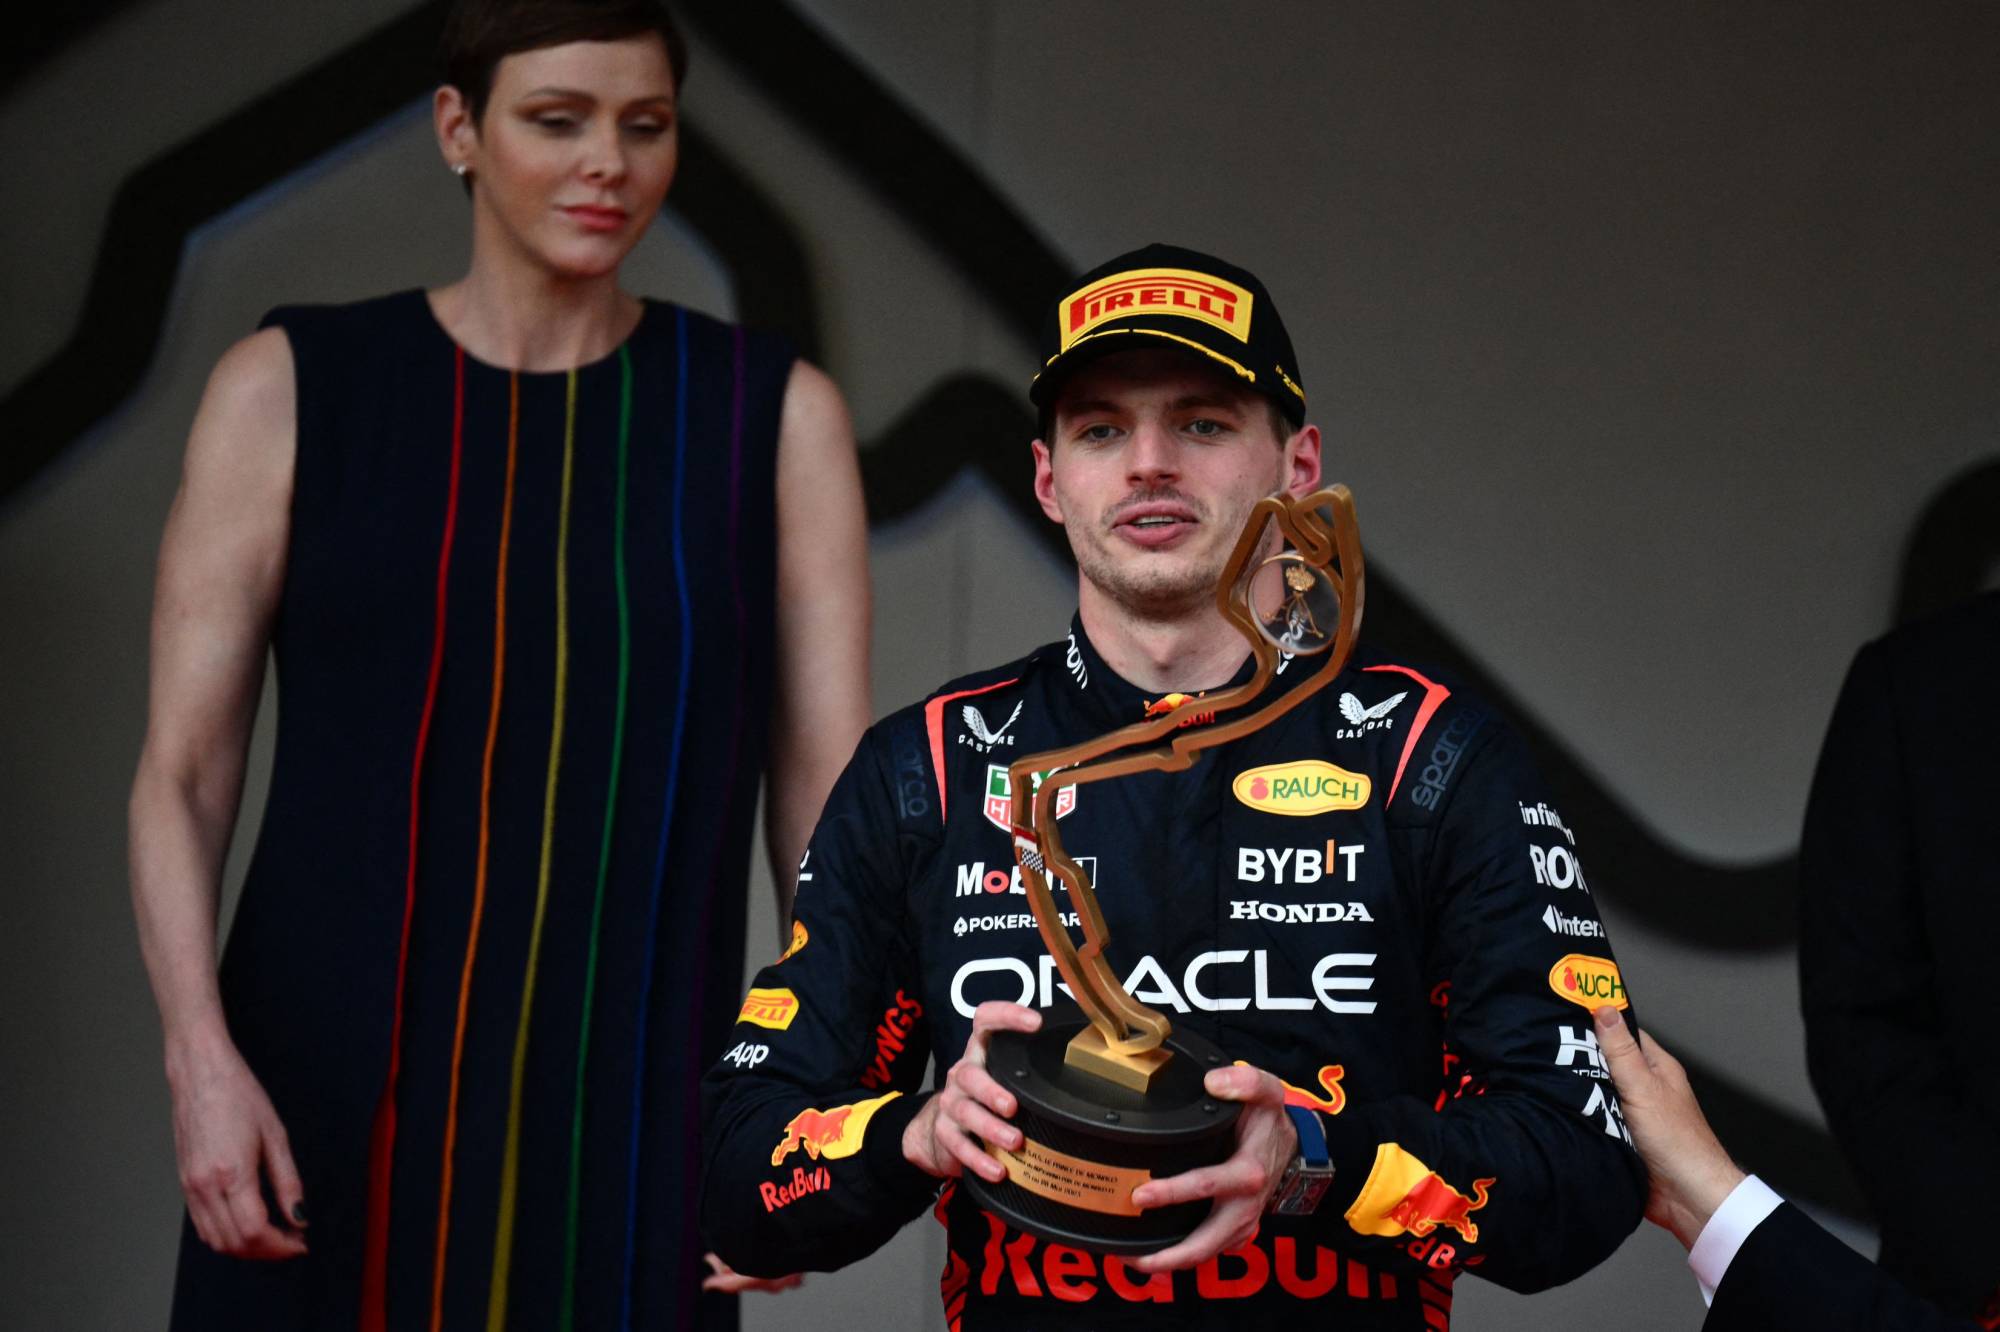 Max Verstappen earns wire-to-wire win at Monaco Grand Prix - The Japan Times